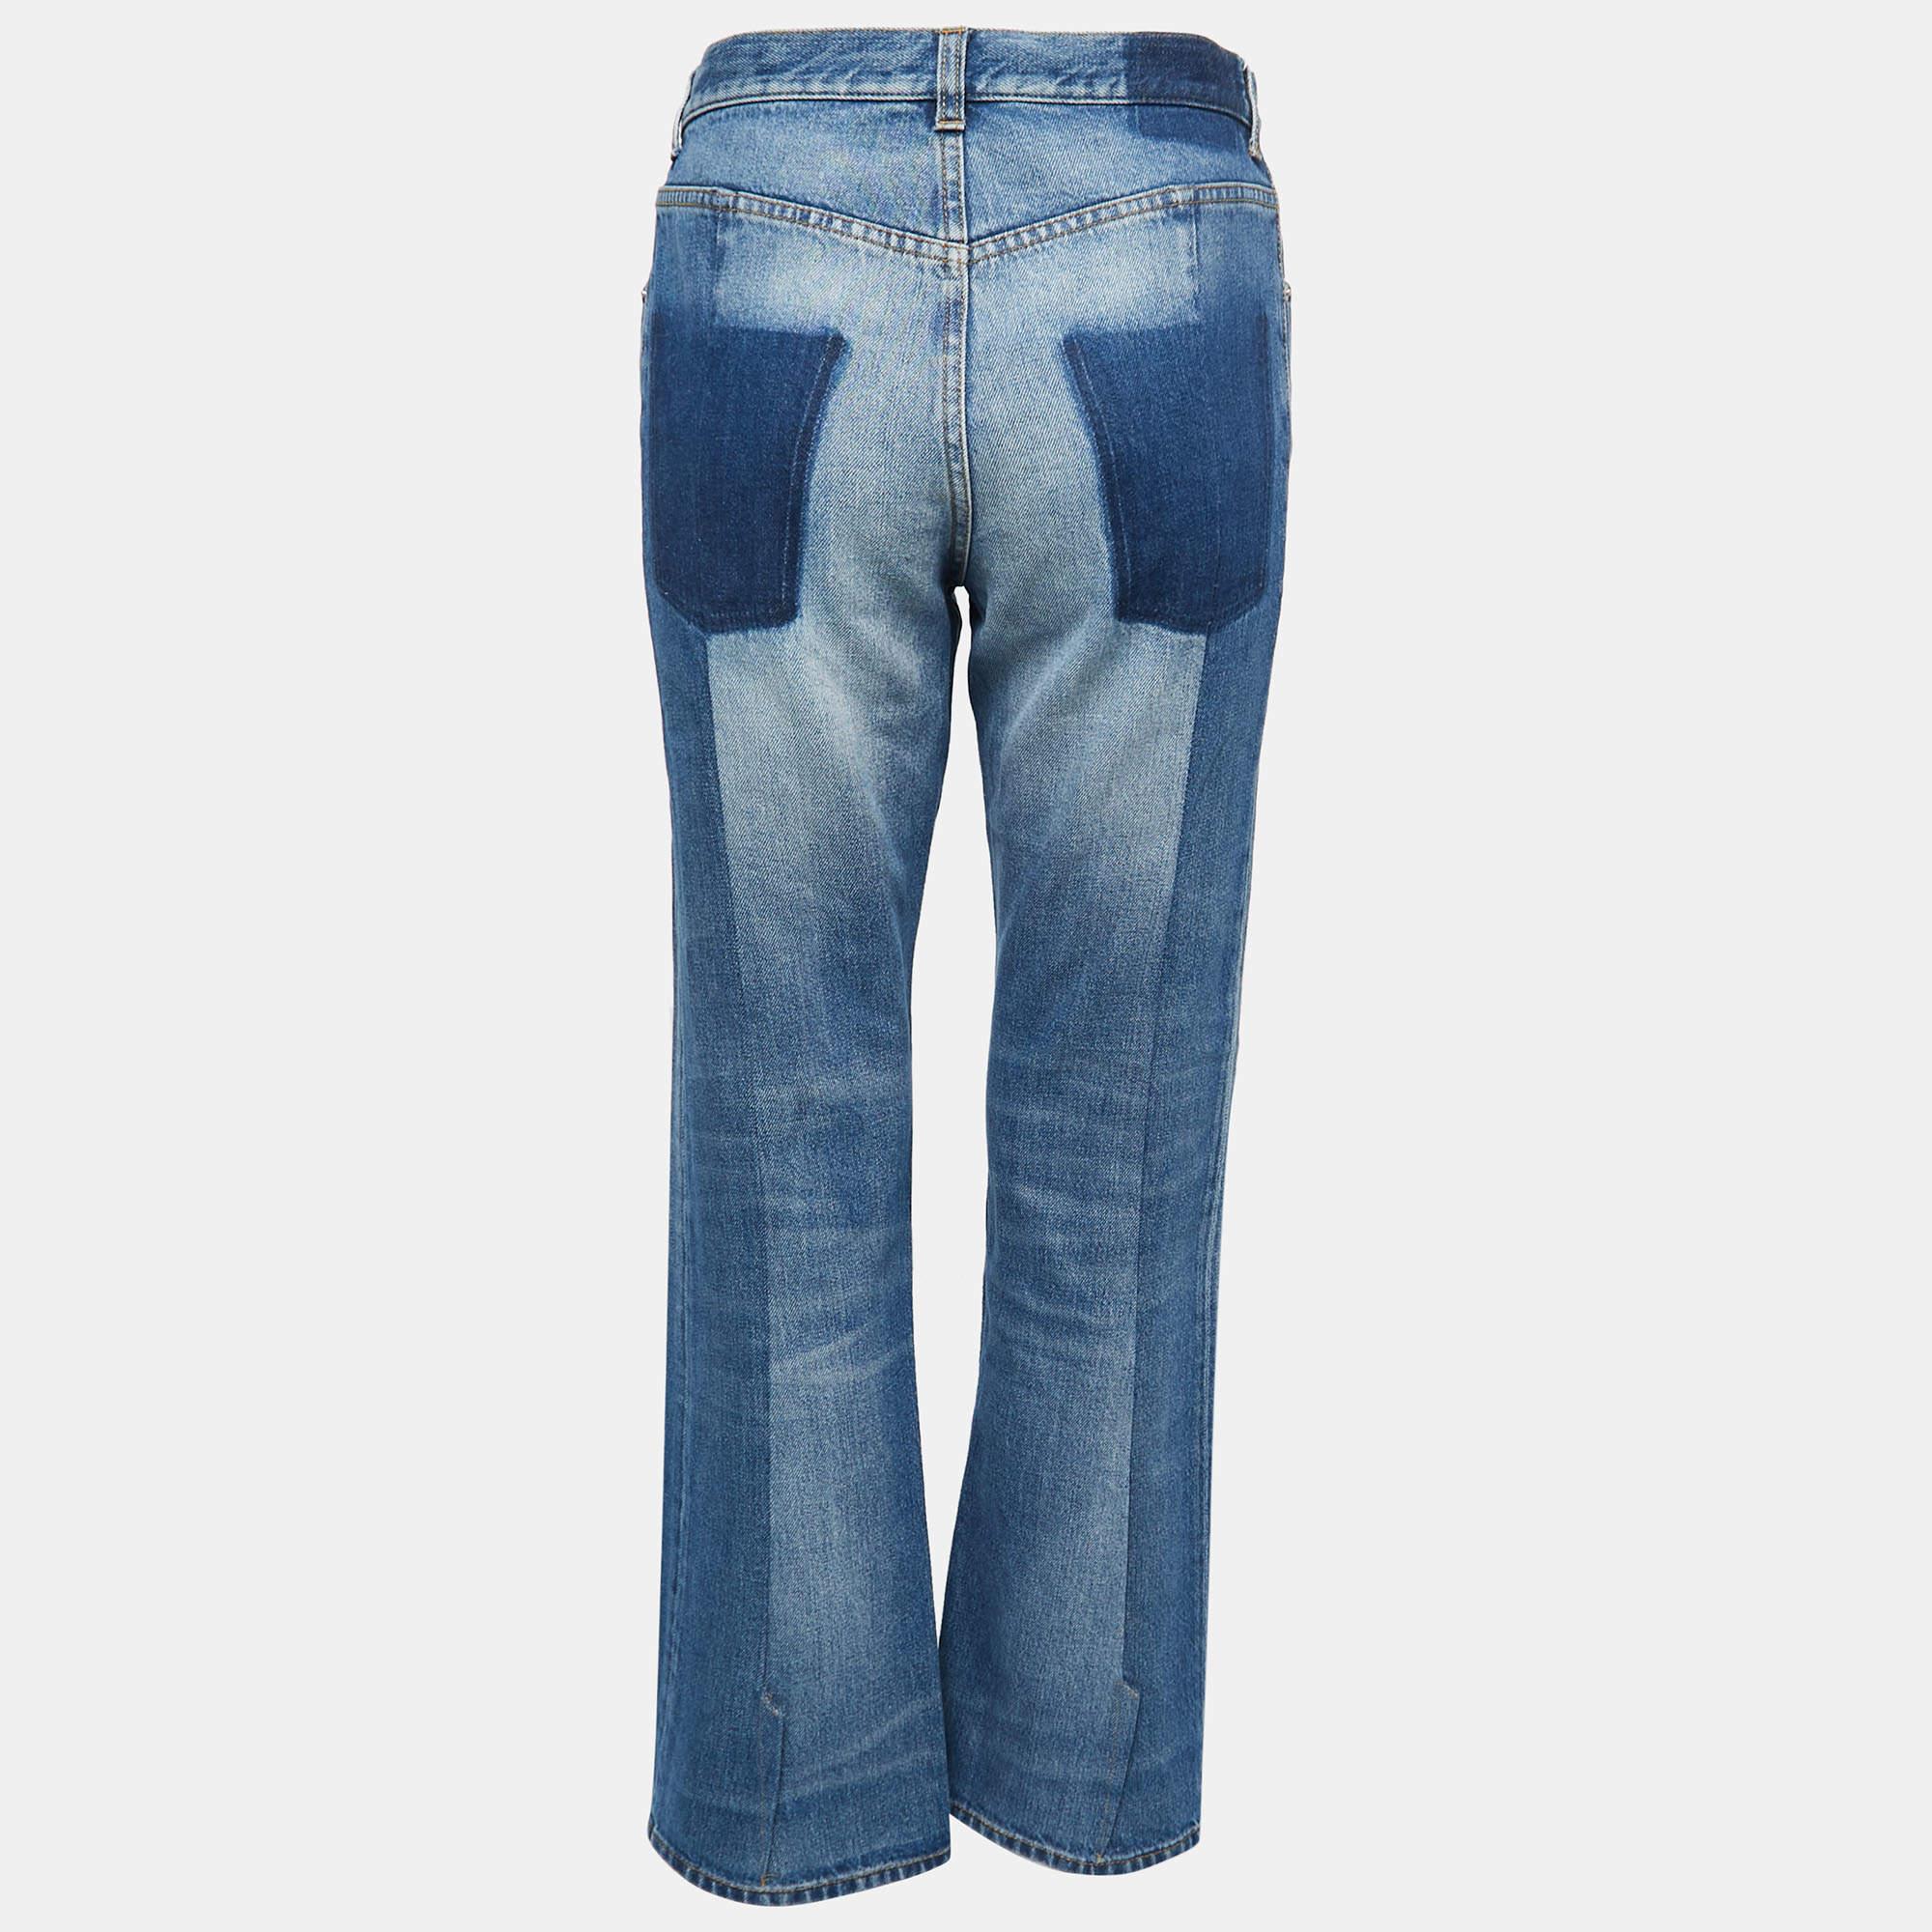 Pick these jeans from Alexander McQueen and feel absolutely stylish. They have been skillfully stitched using high-quality fabric and flaunt a superb fit. Pair these jeans with your favorite sneakers as you head out for the day.

